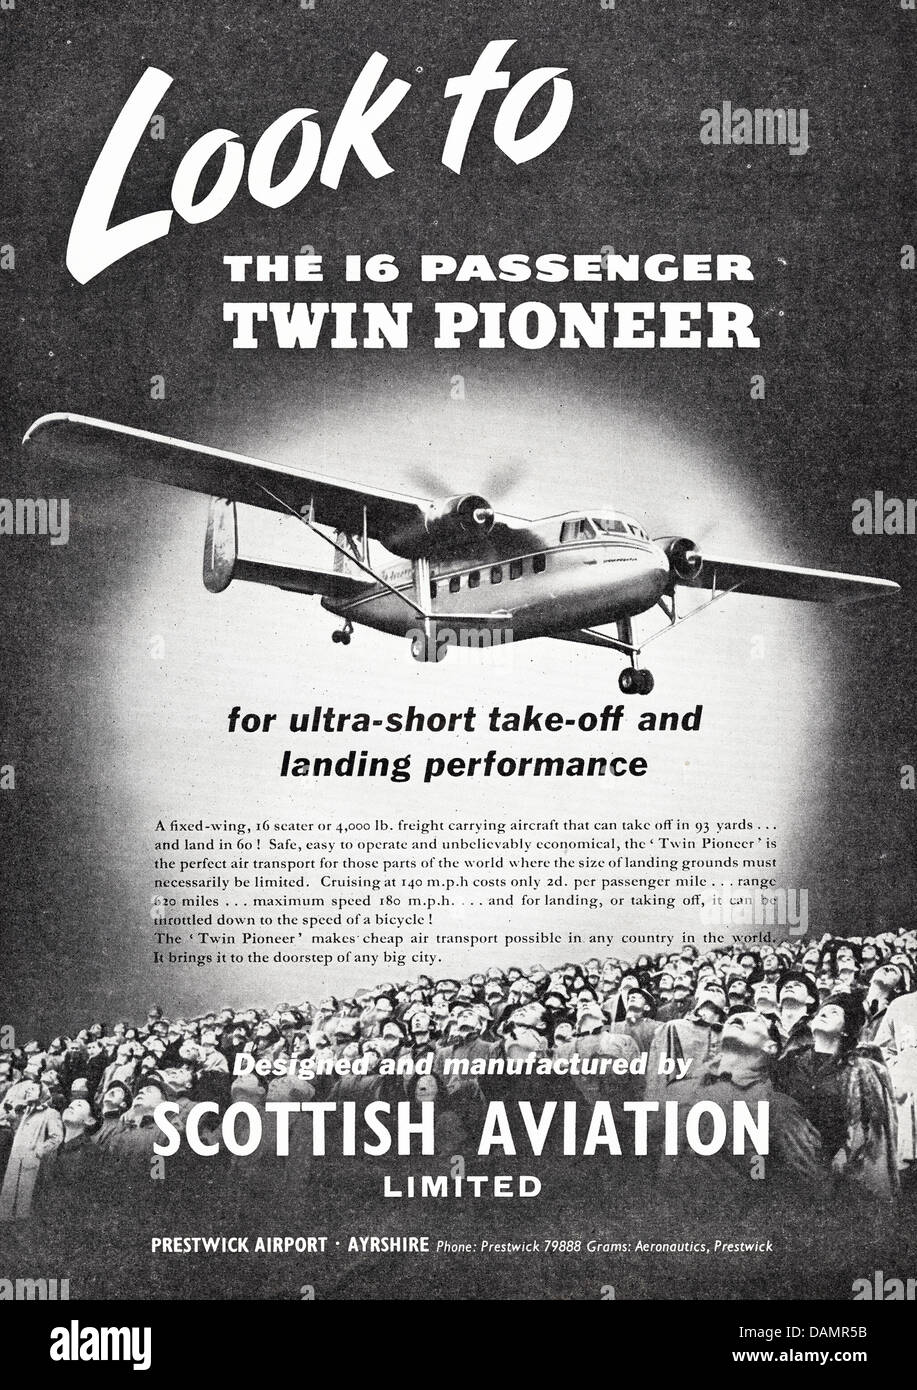 Advert for the 16 passenger Twin Pioneer aircraft built by Scottish Aviation Ltd Prestwick Airport Ayrshire Scotland UK advertisement in trade magazine circa 1955 Stock Photo